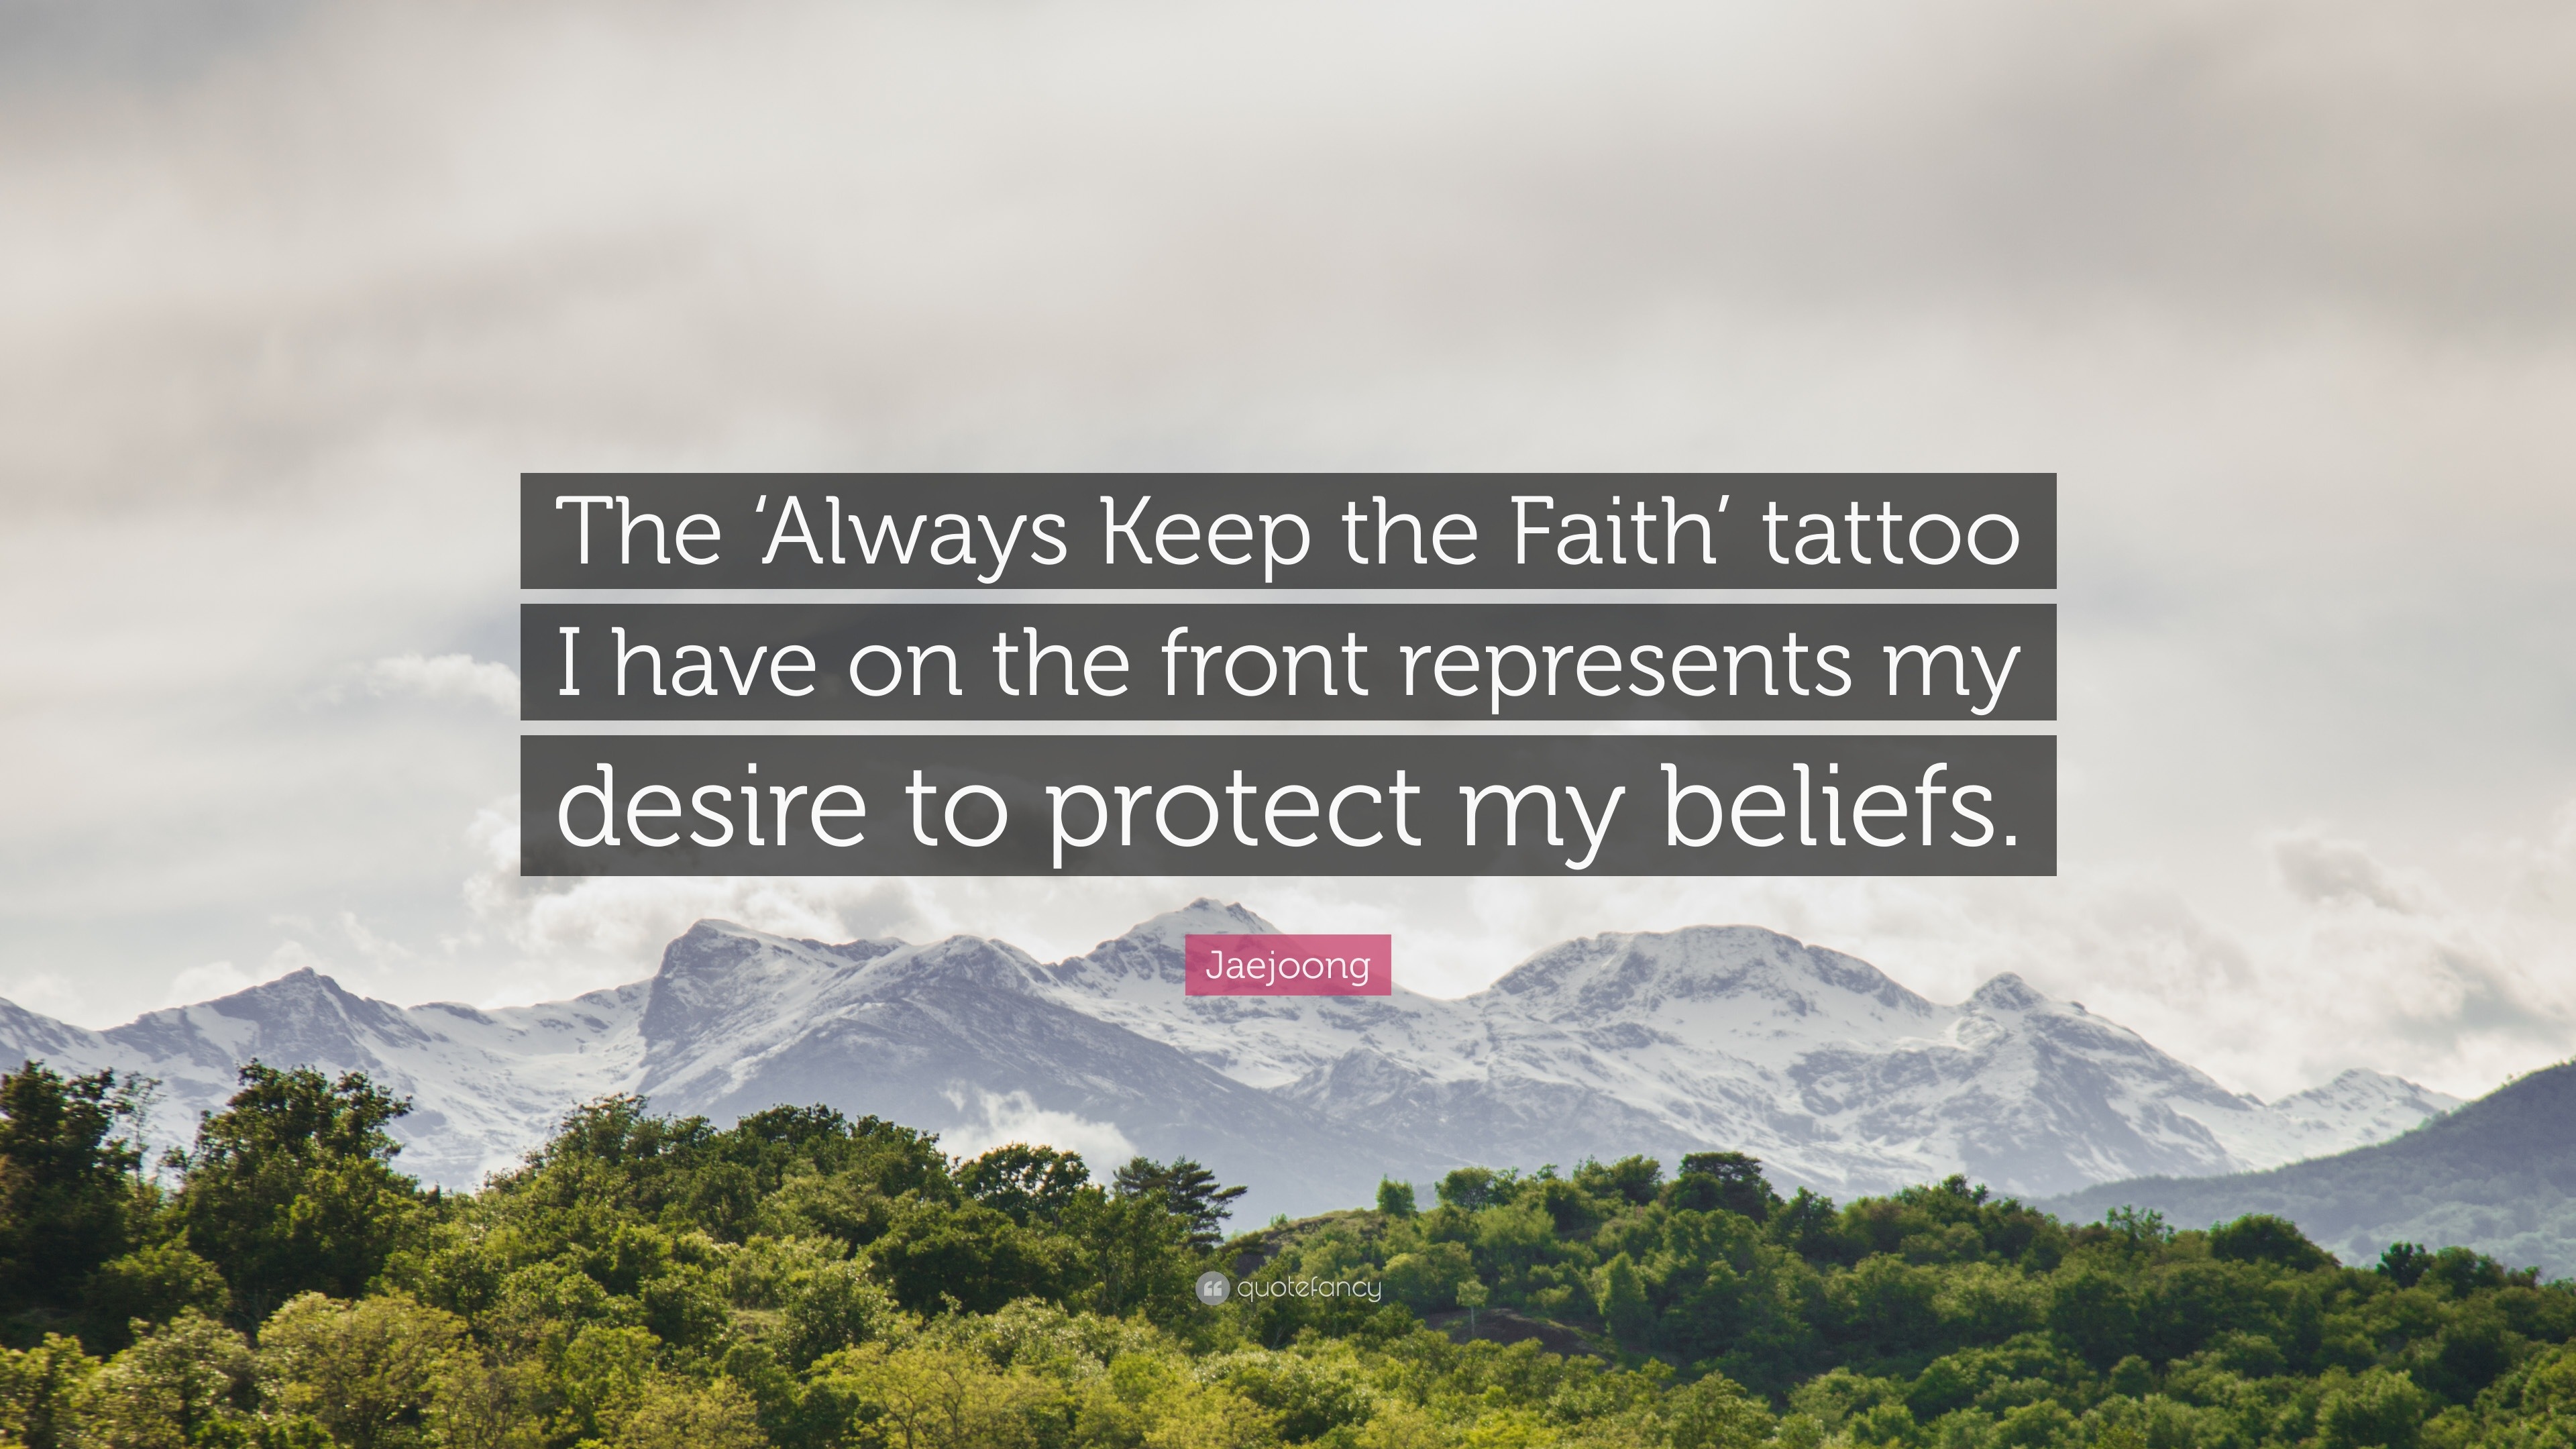 101 Best Faith Tattoo Ideas You Have To See To Believe!